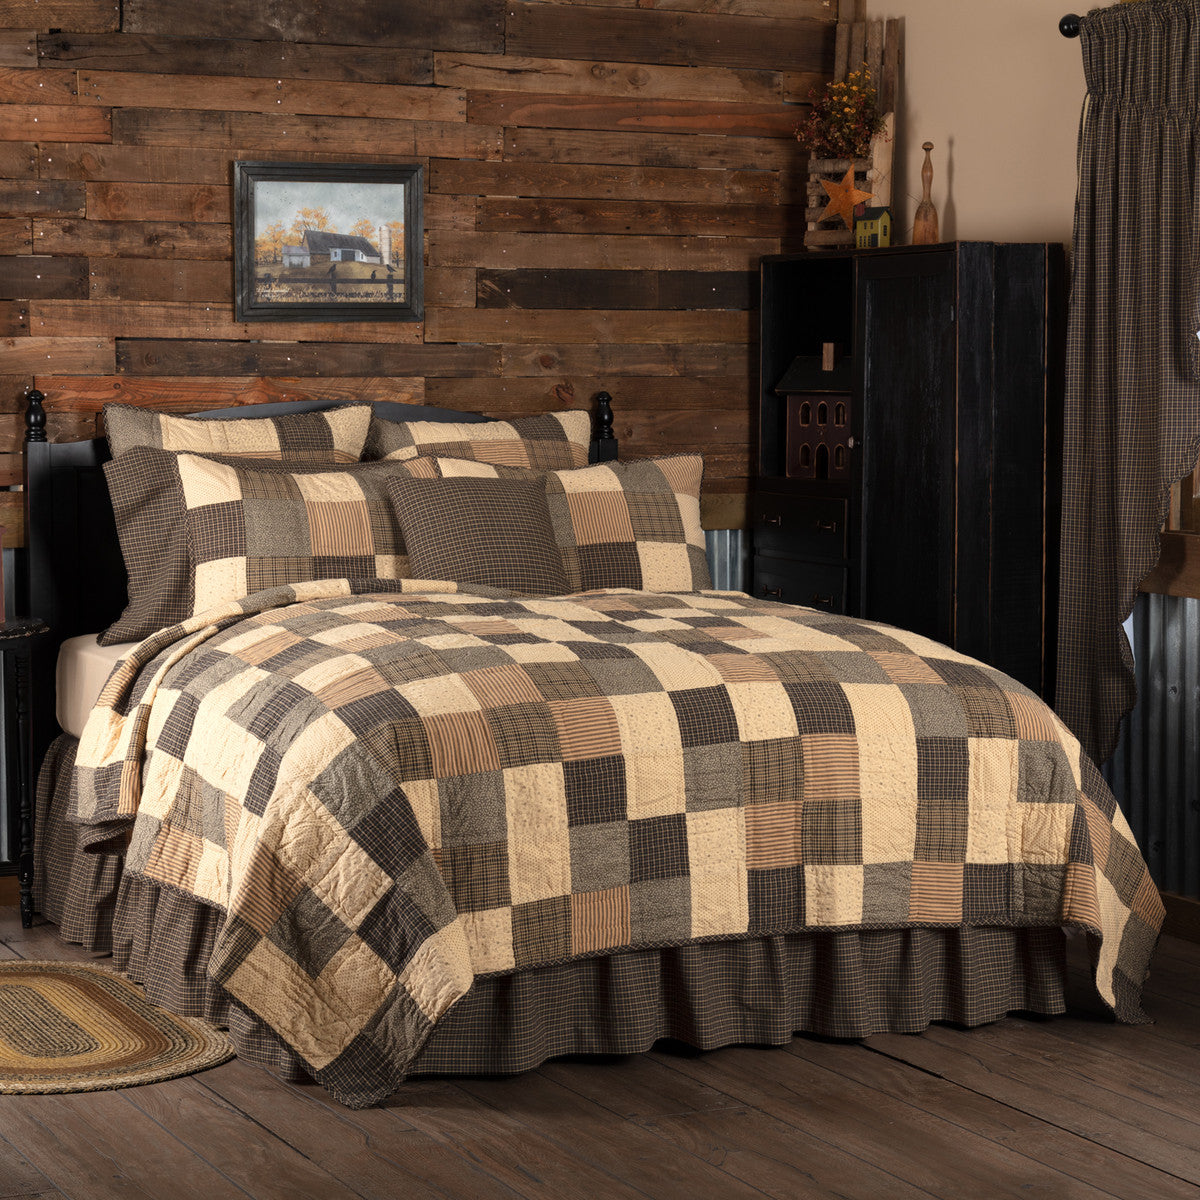 Kettle Grove Quilted Collection - black, creme and natural patchwork with stars and crows